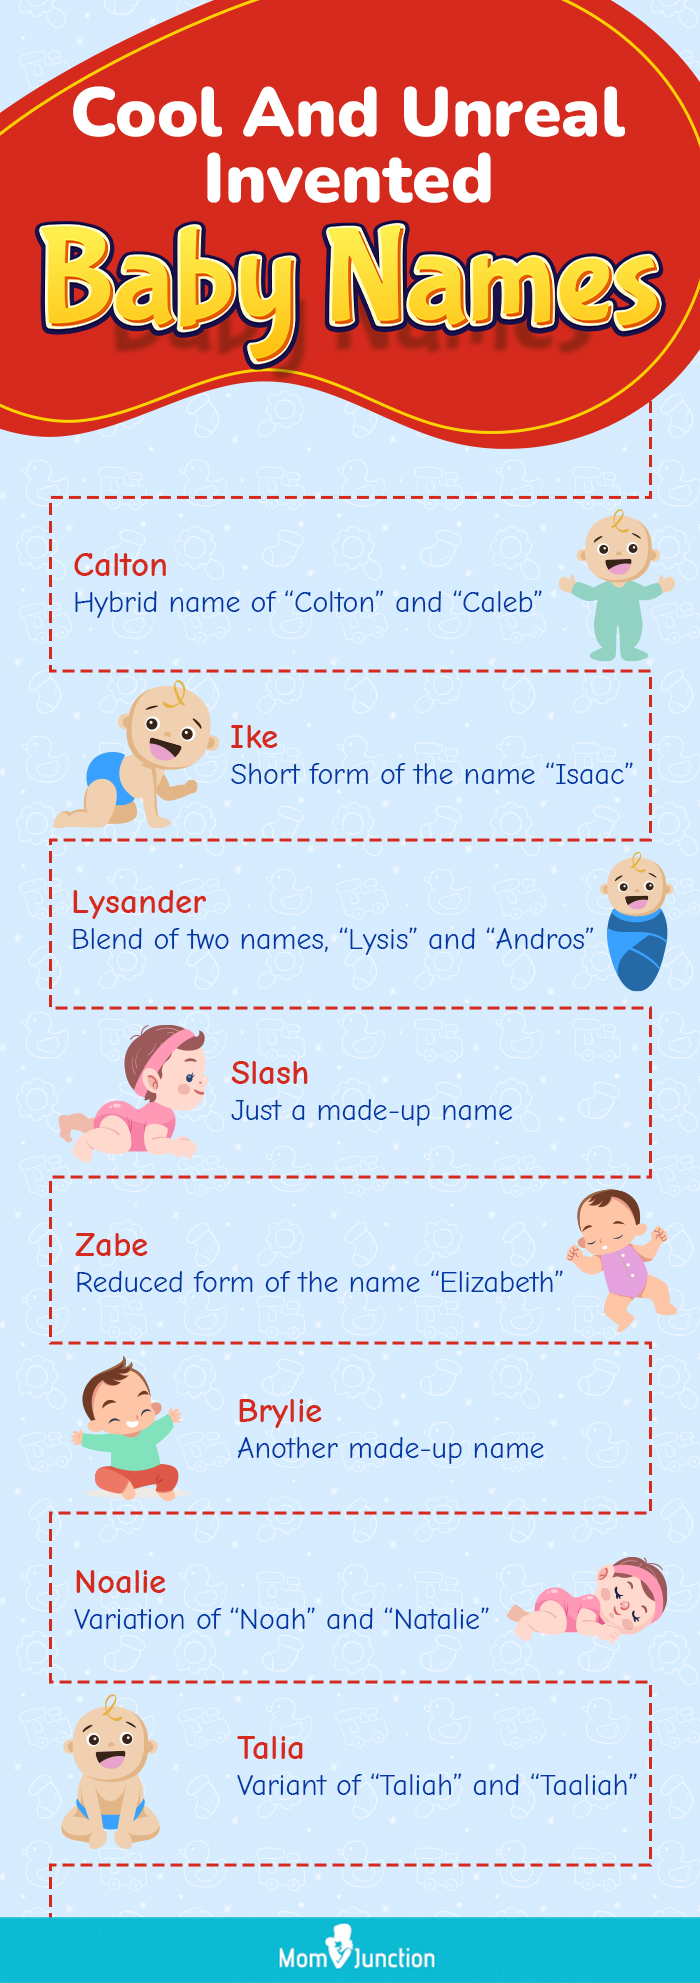 cool and unreal invented baby names (infographic)